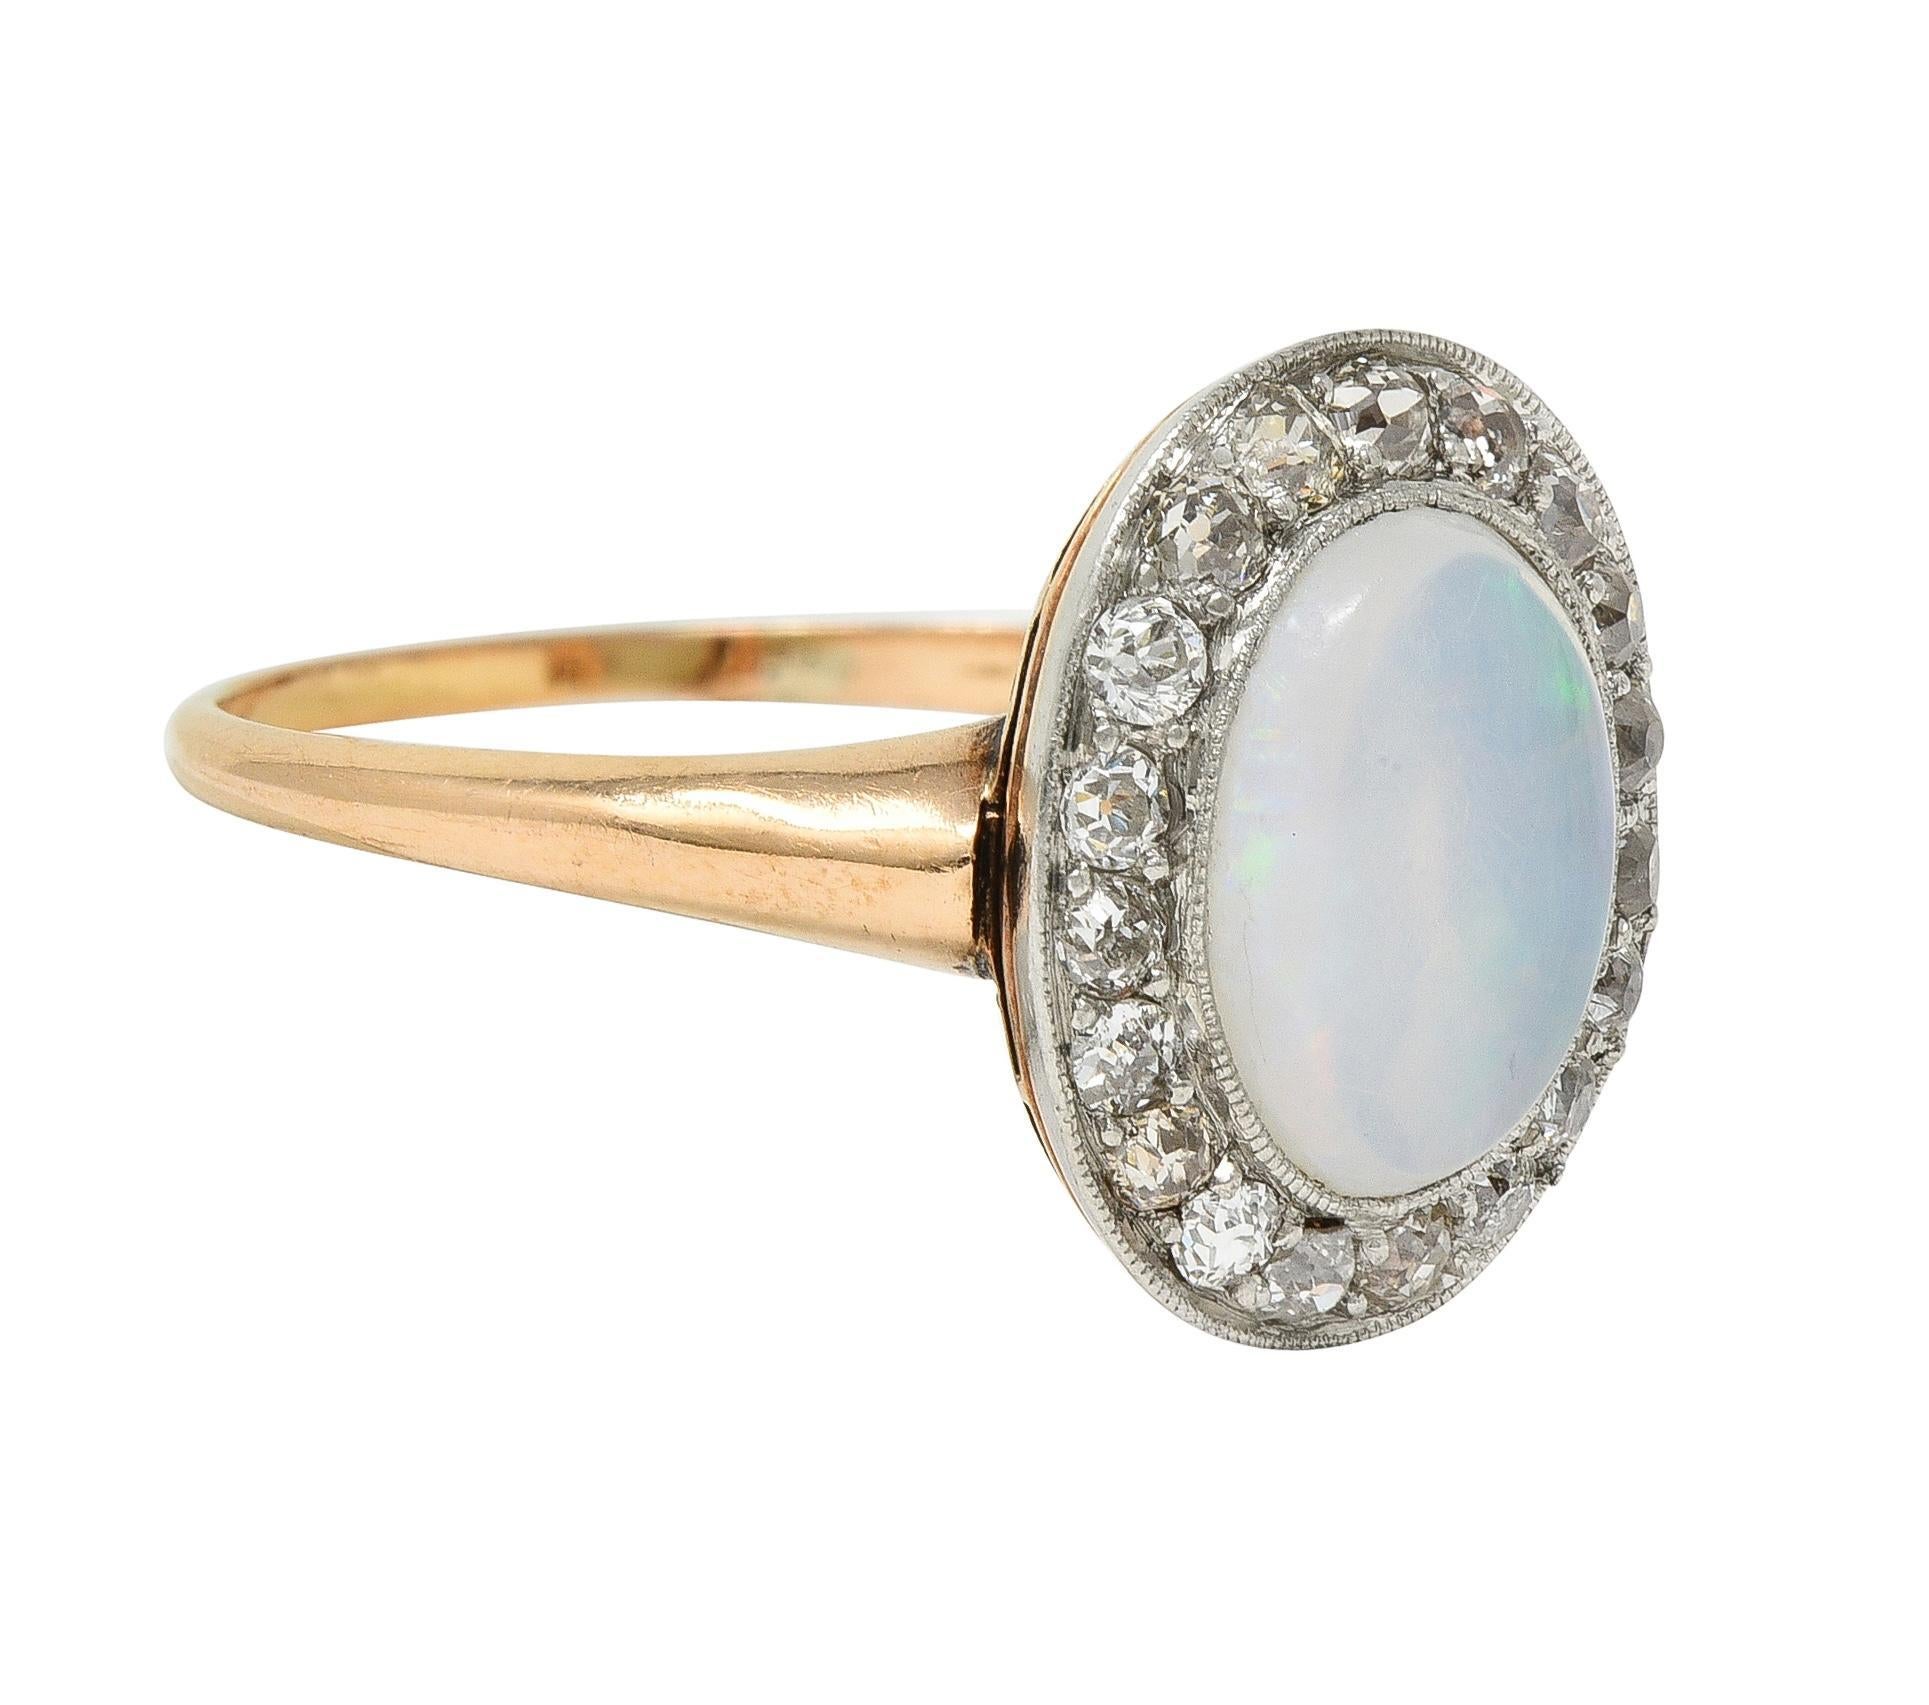 Centering an oval-shaped jelly opal cabochon measuring 10.0 x 8.0 mm 
Transparent white body color with spectral play-of-color 
Bezel set in platinum topped head with halo surround 
Comprised of old European and mine cut diamonds
Weighing